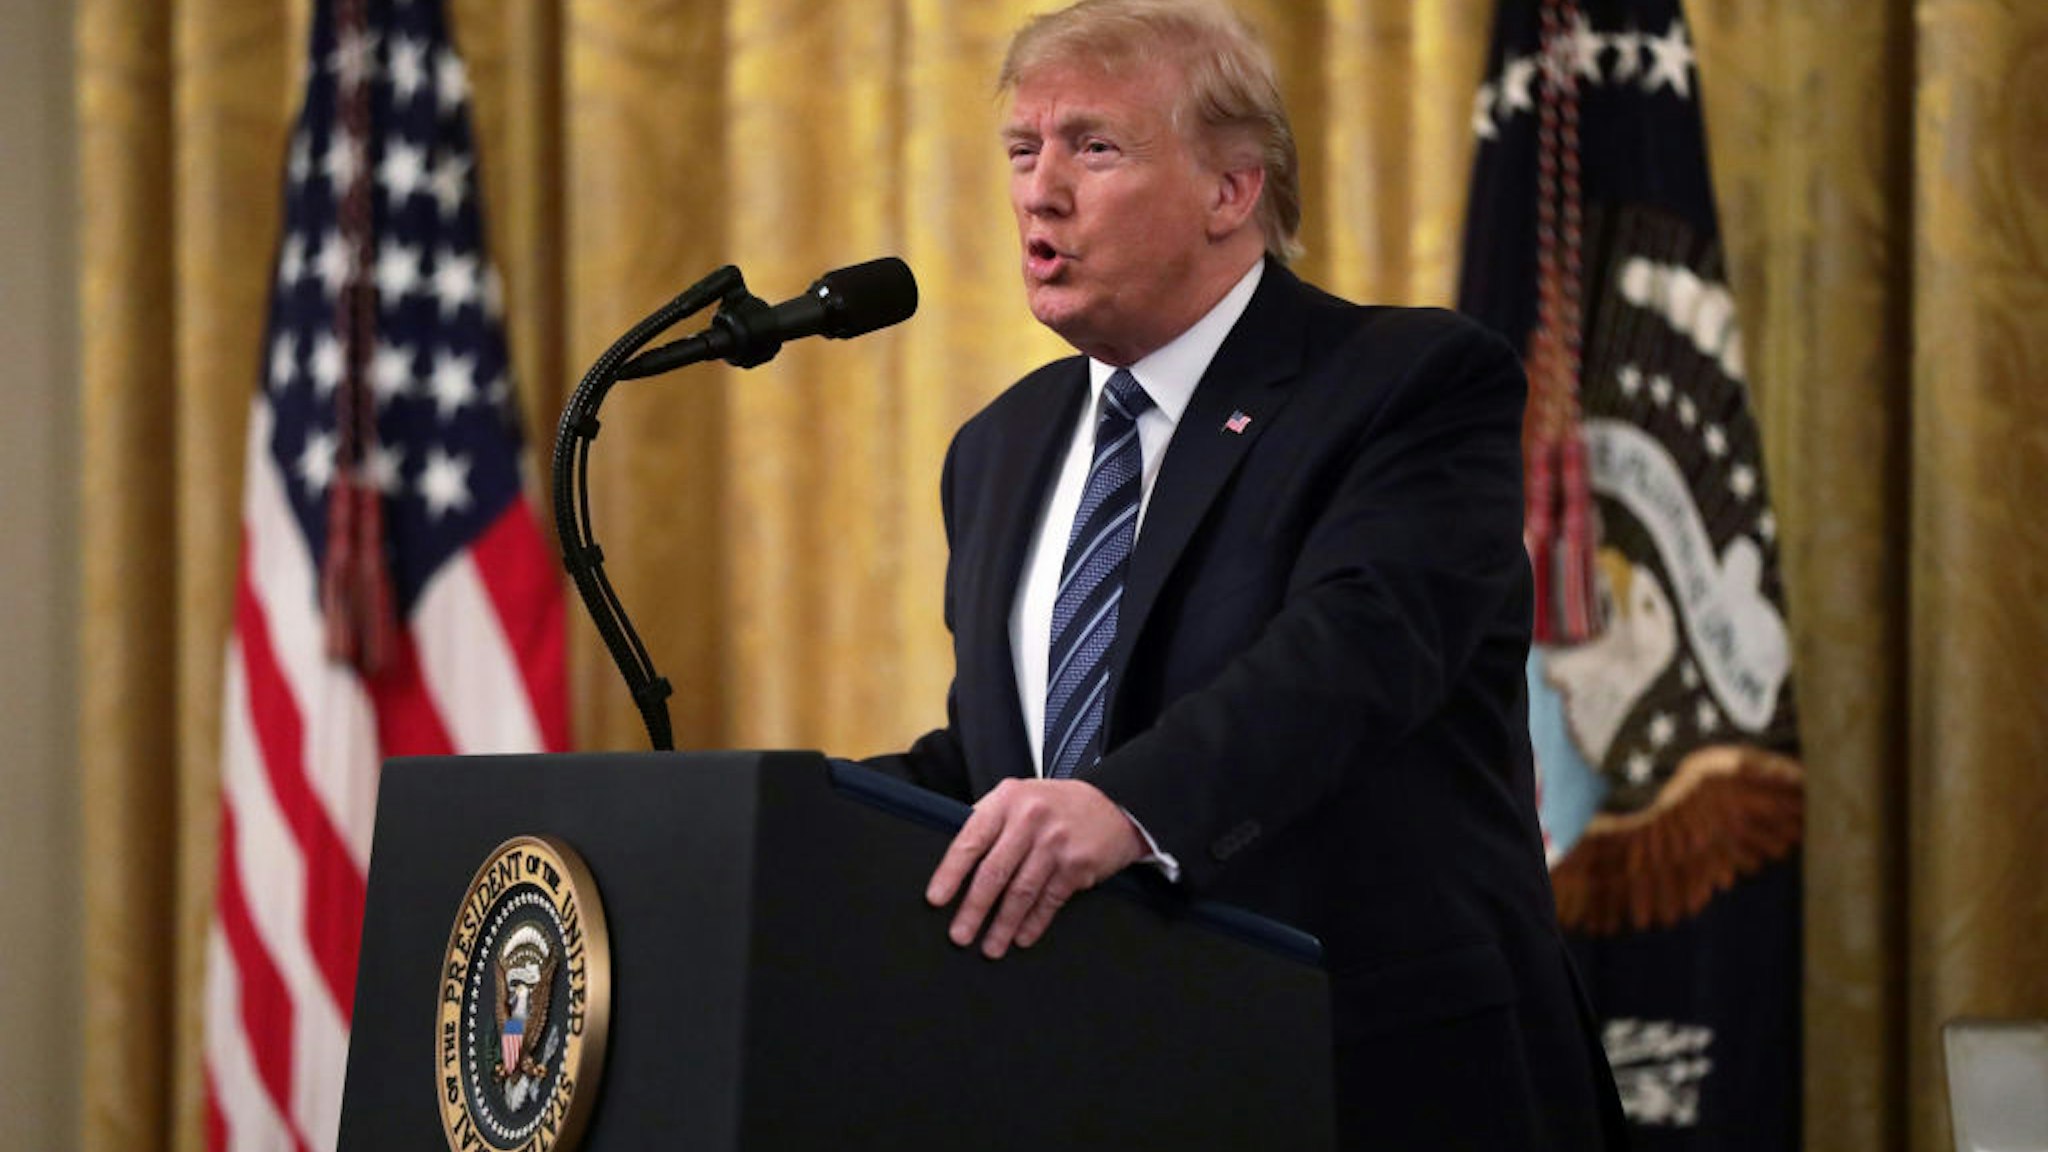 U.S. President Donald Trump speaks during an East Room event at the White House November 7, 2019 in Washington, DC.